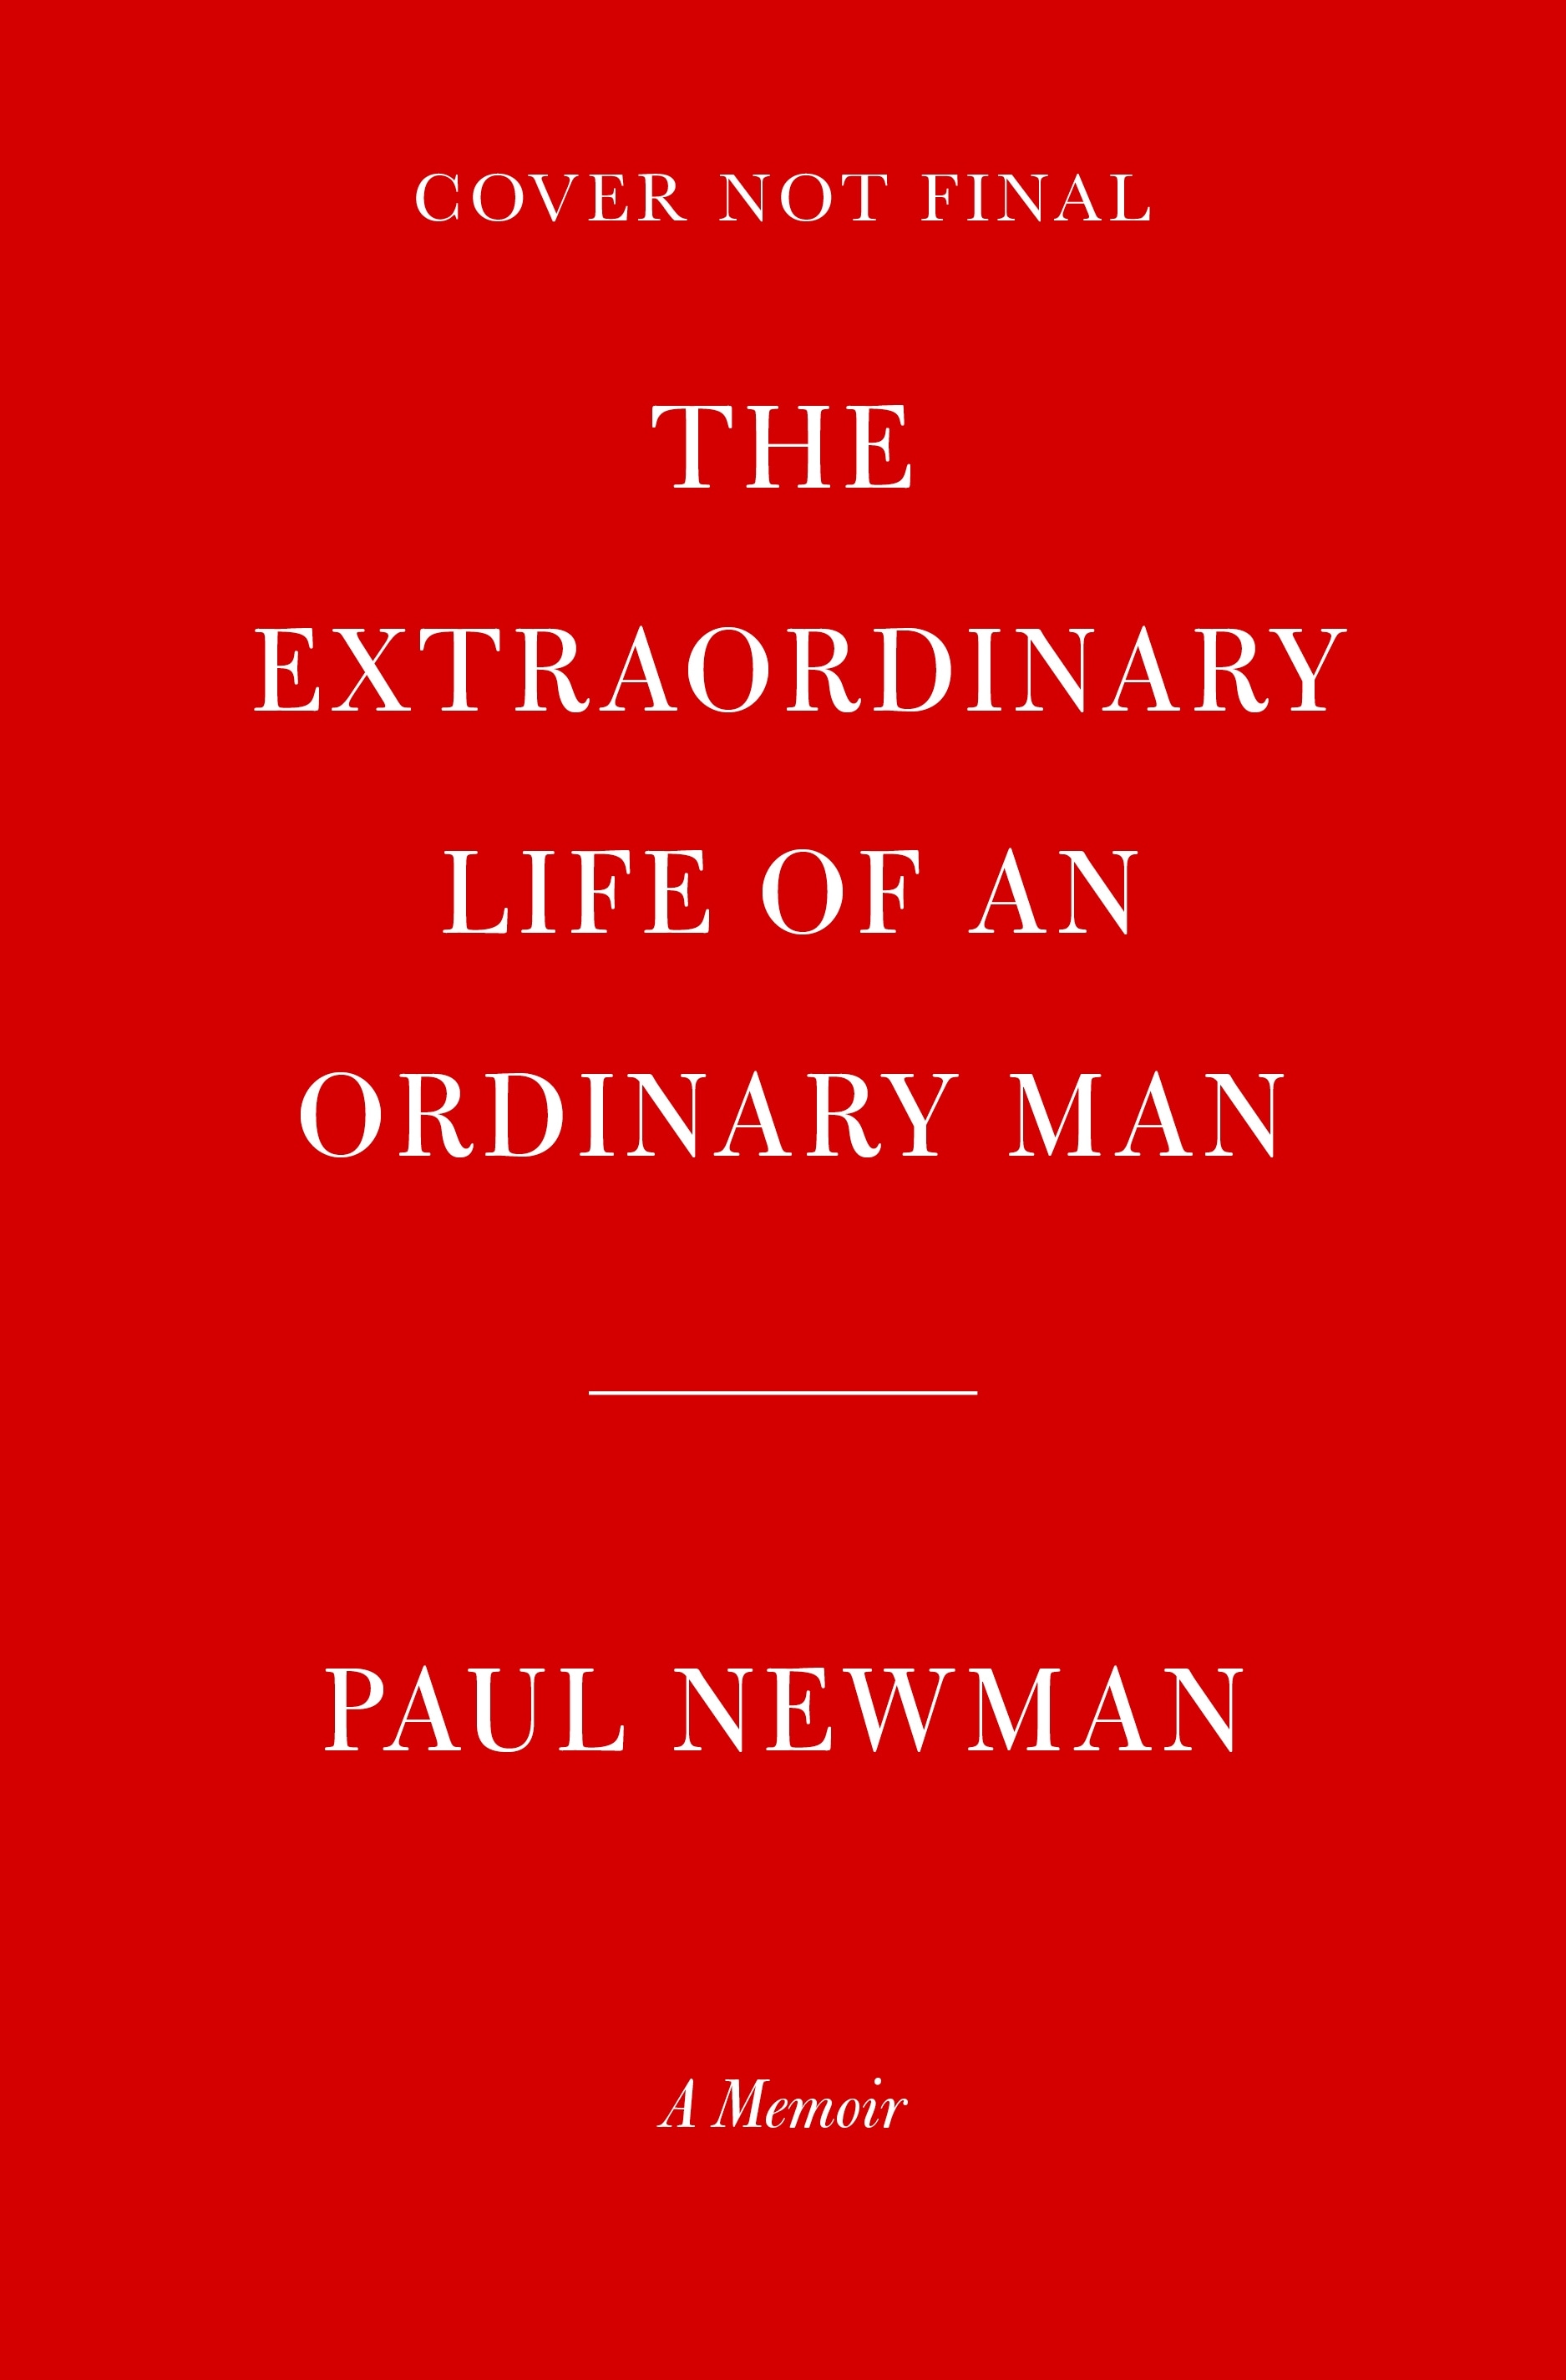 Book “The Extraordinary Life of an Ordinary Man” by Paul Newman — October 27, 2022